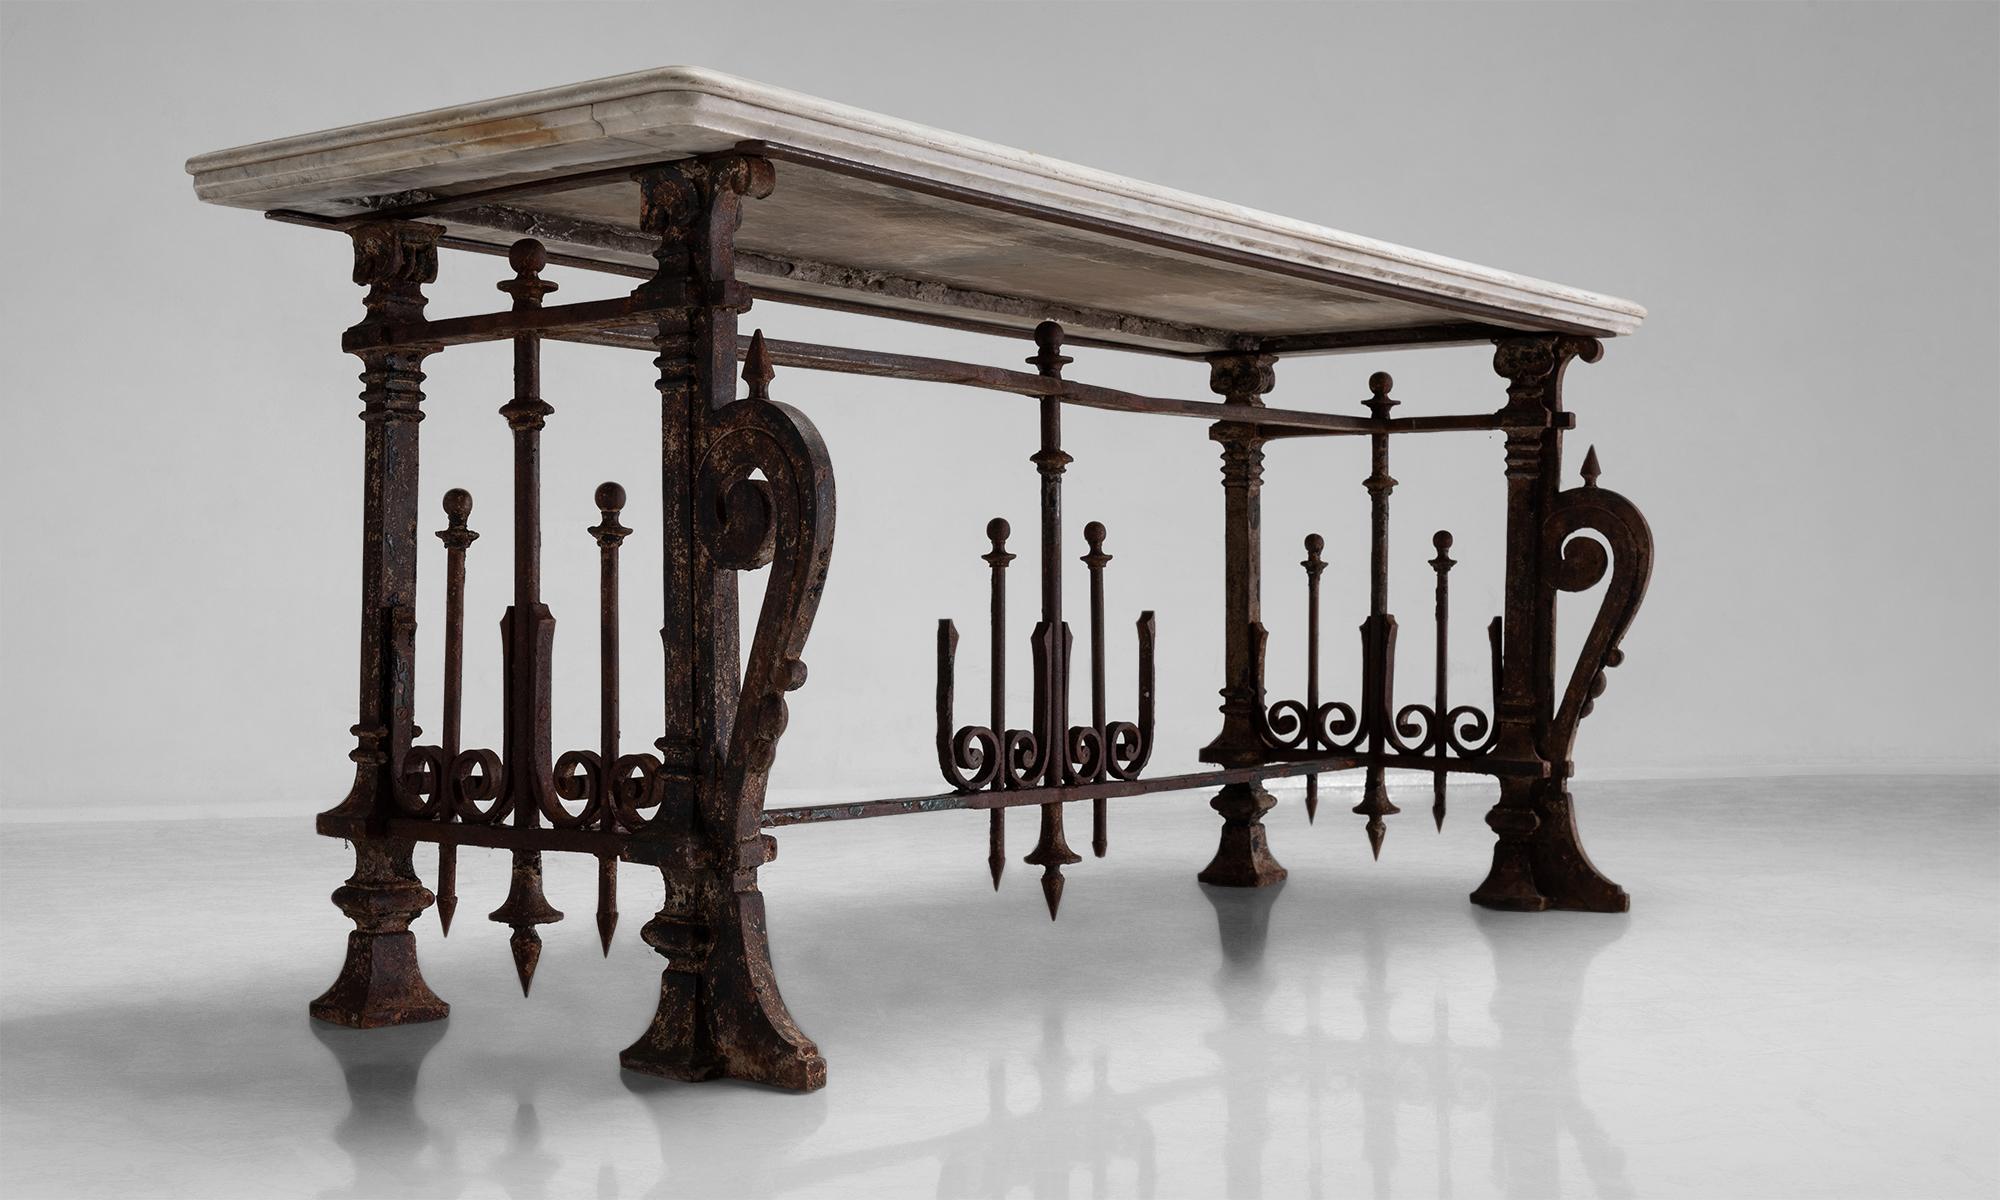 Beautiful console table from a French chocolatier with decorative base and exceptional marble top.

Measures: 71” W x 25.5” D x 31” H.